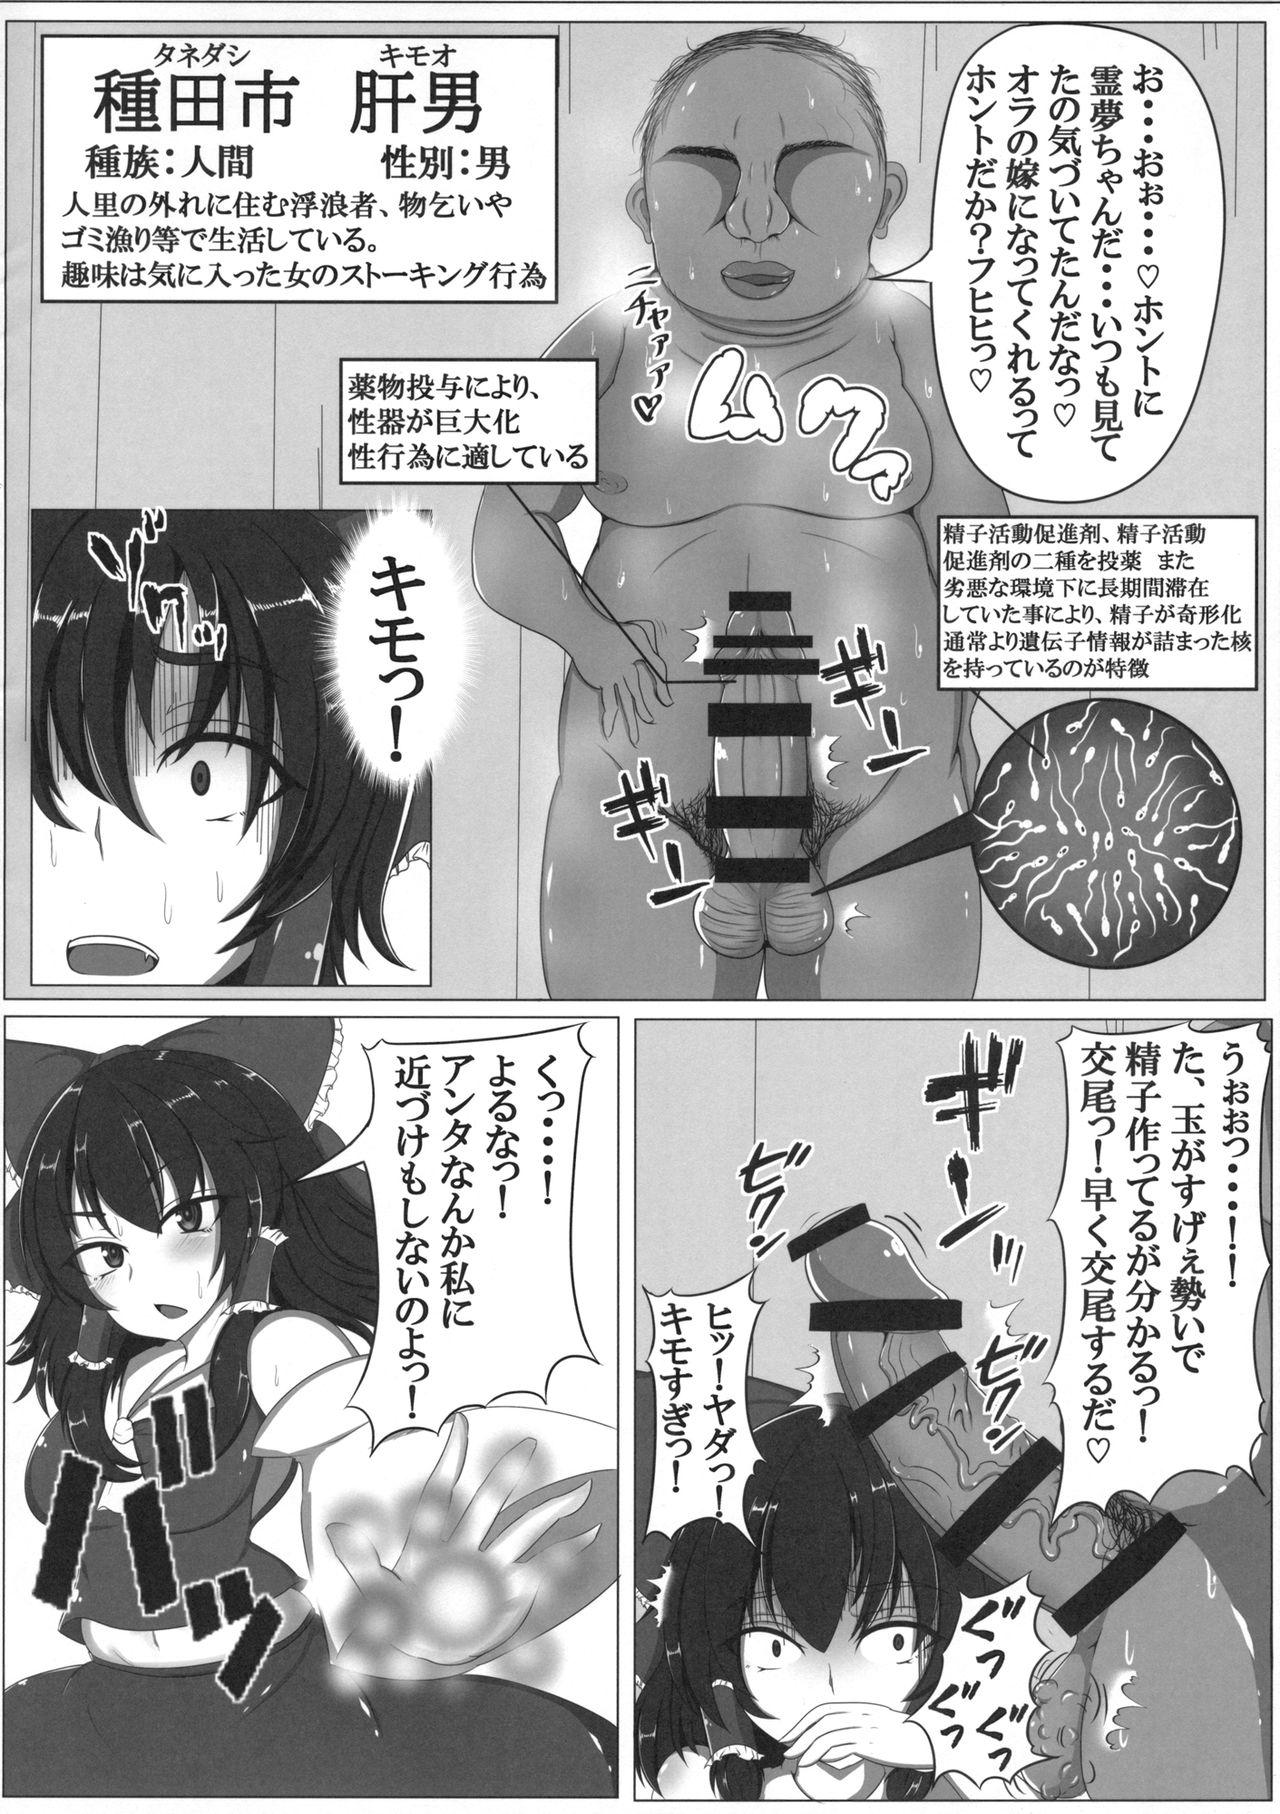 Bigcock 東方婚姻録～博麗霊夢編～ - Touhou project Anale - Page 5